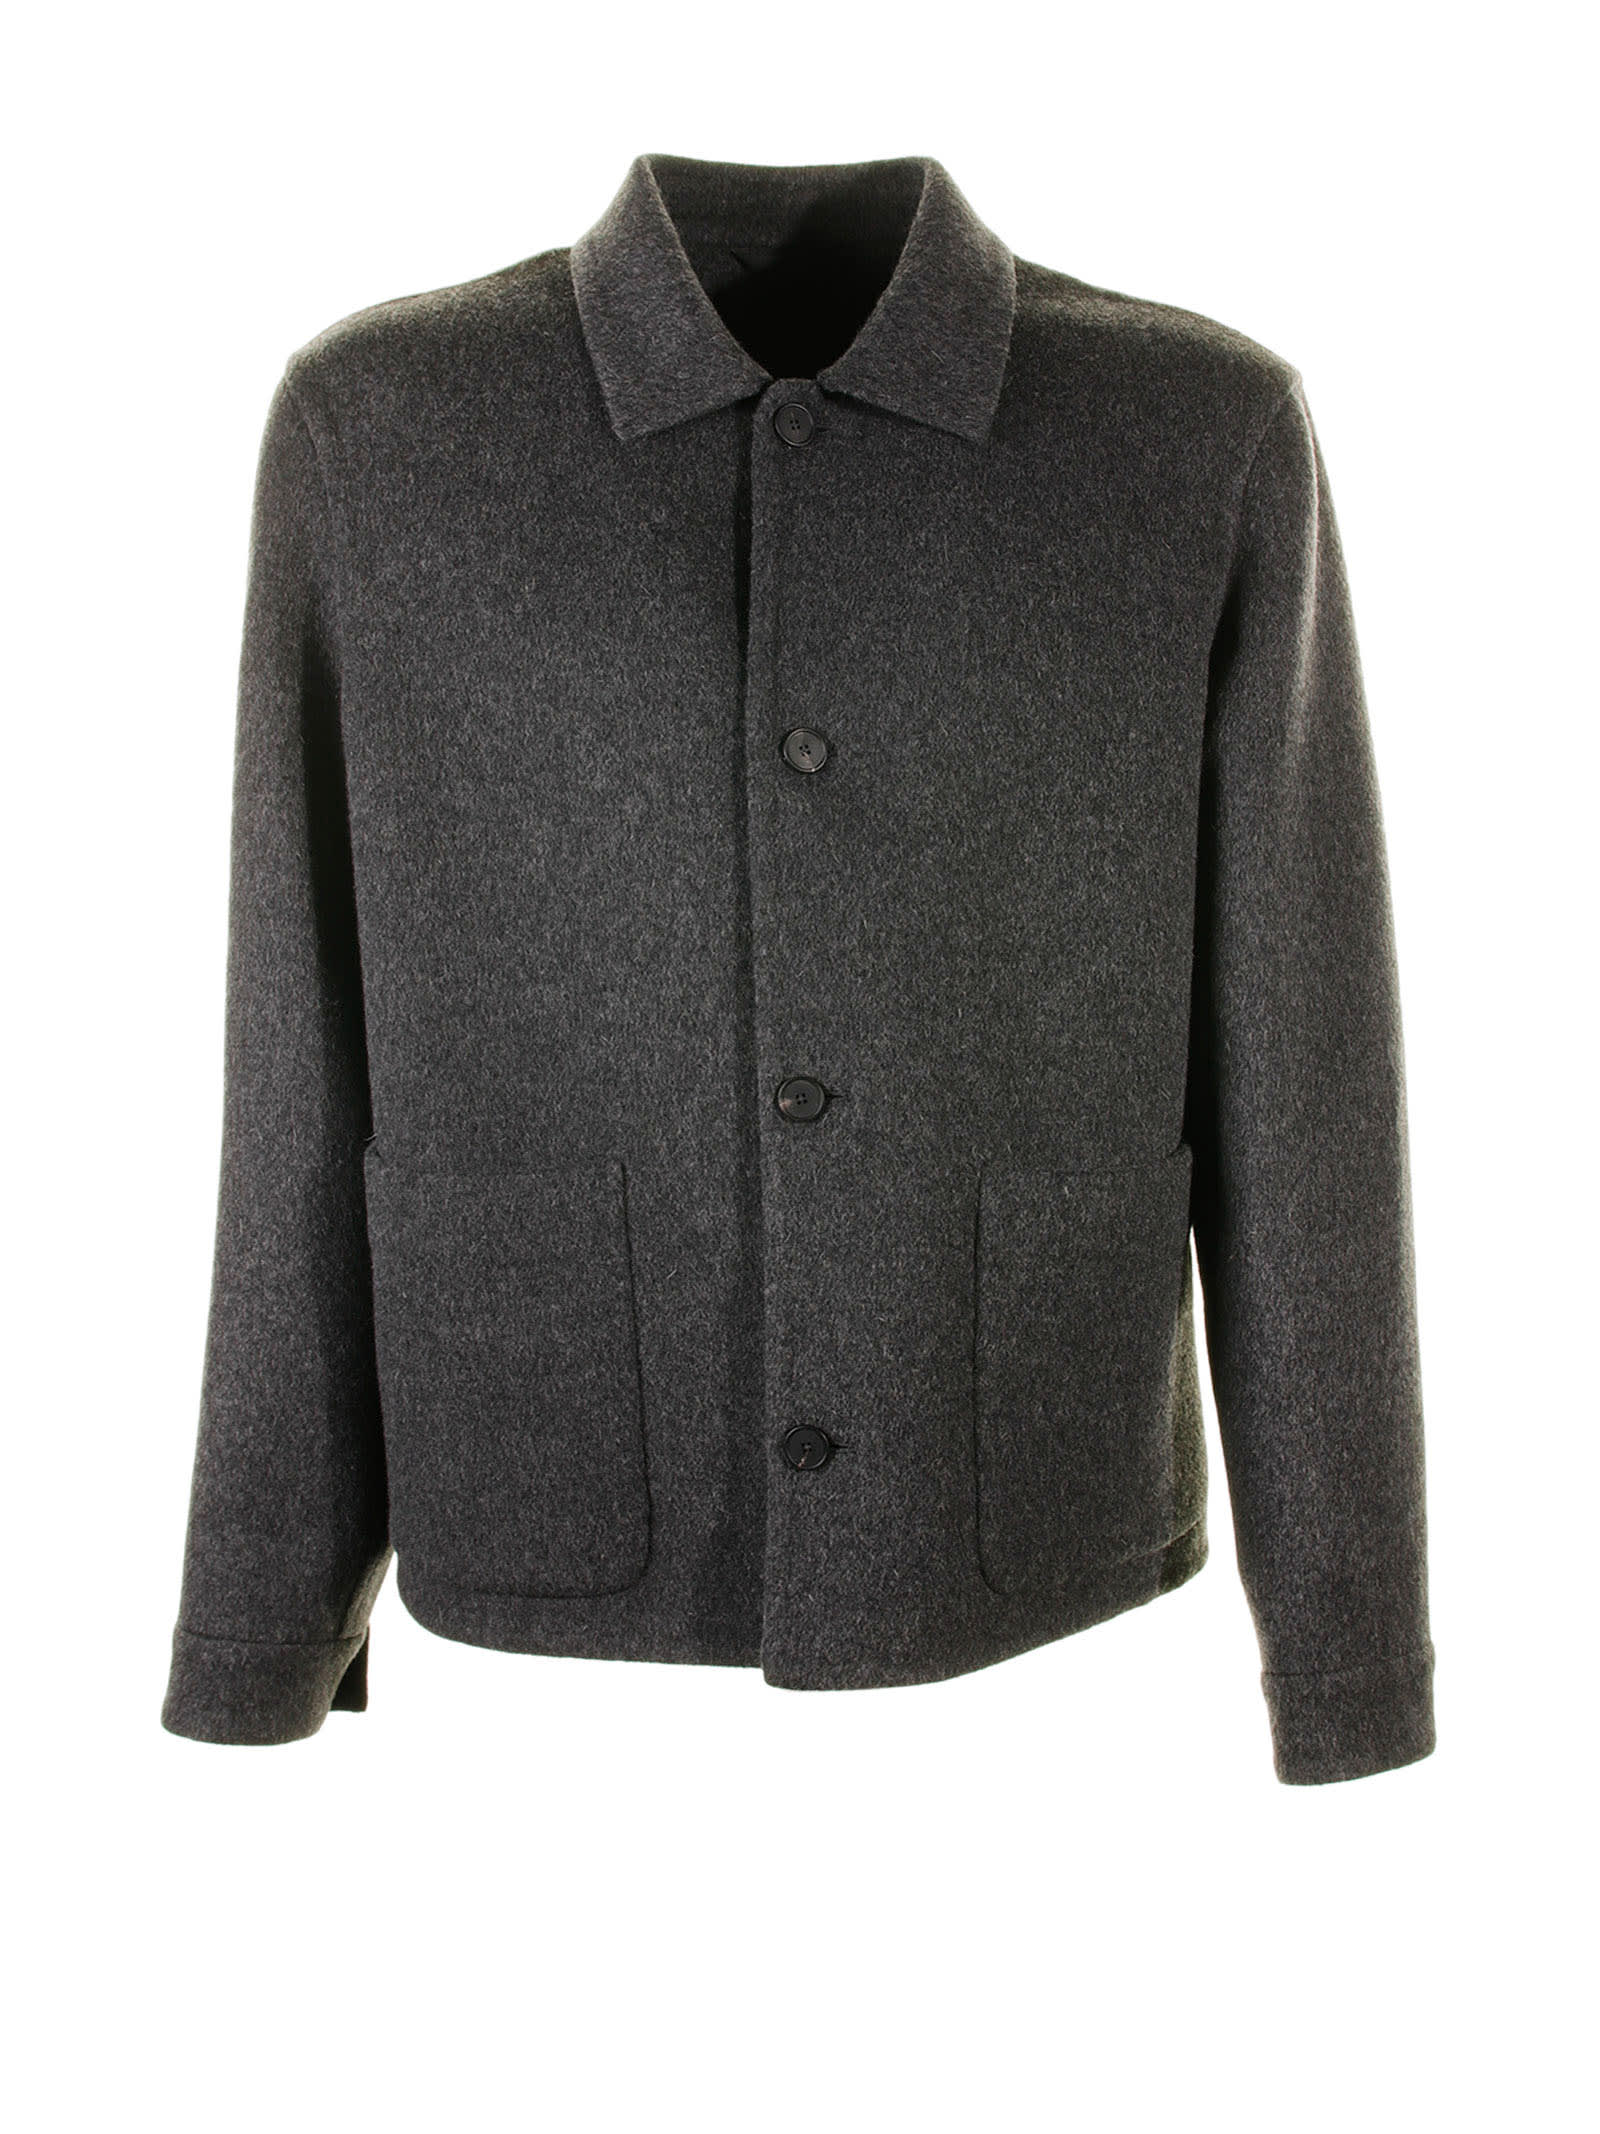 GIVENCHY DOUBLE-FACED WOOL AND CASHMERE JACKET